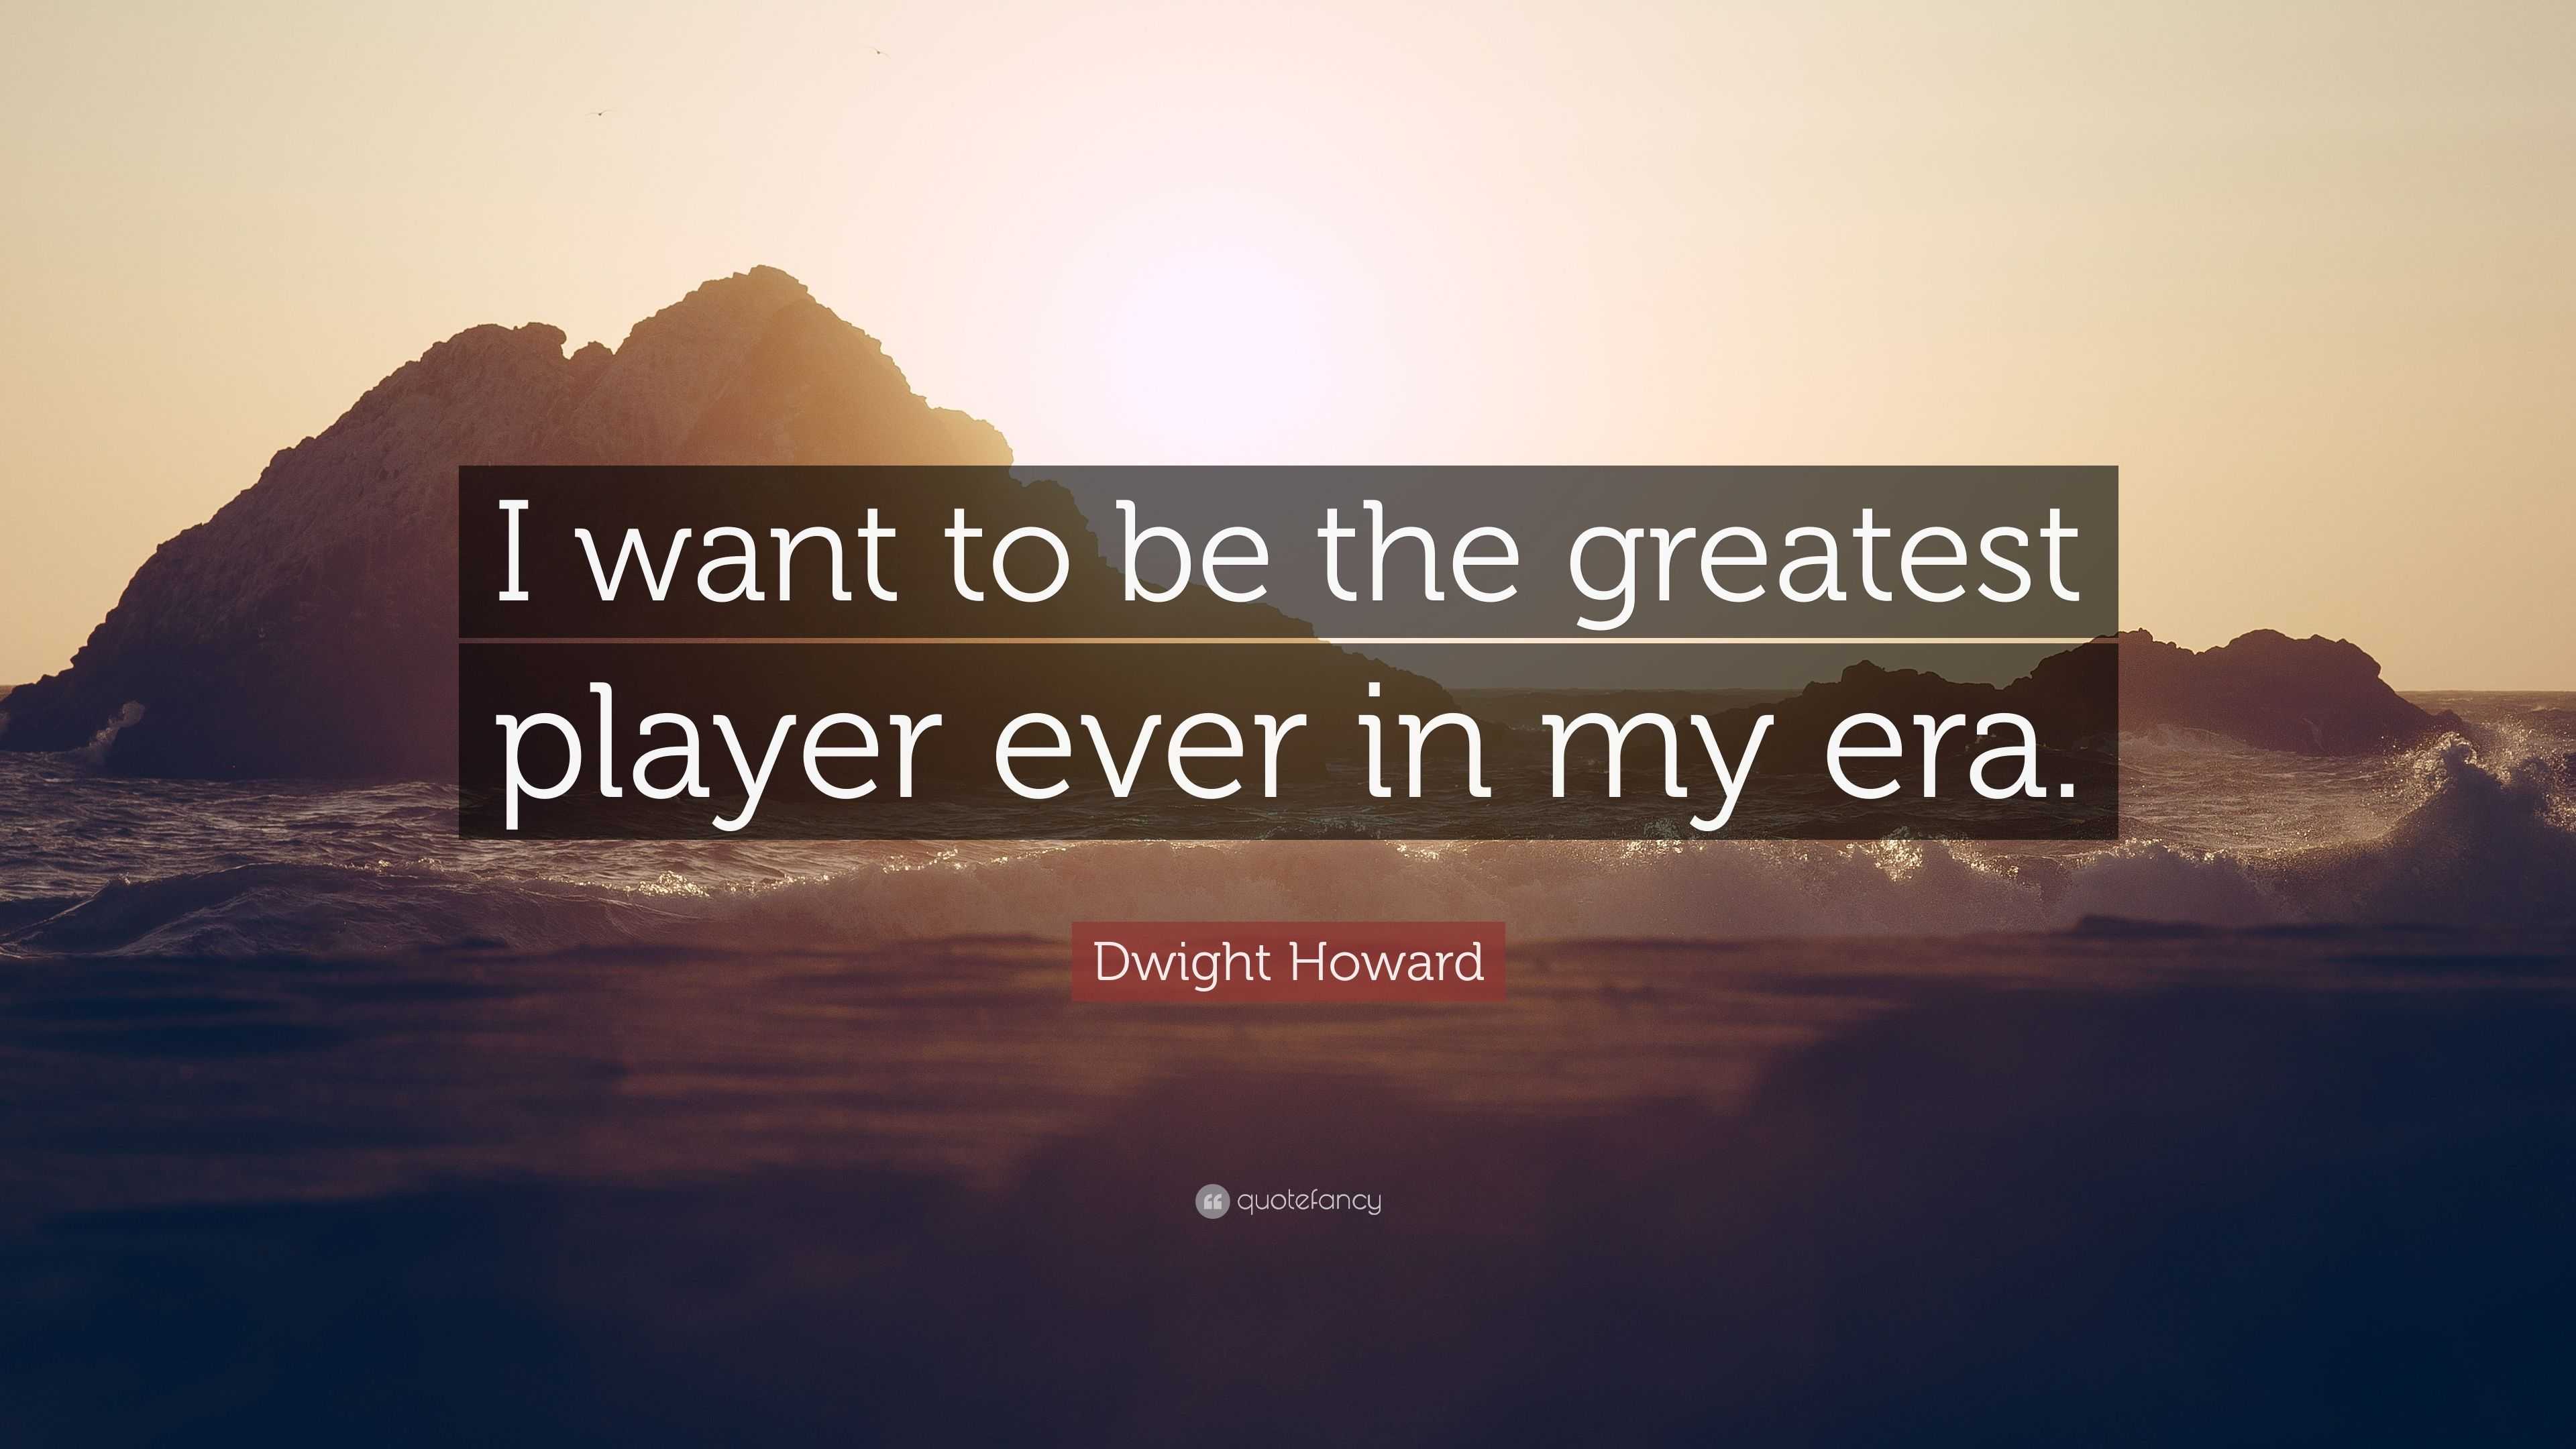 Dwight Howard Quote: “I want to be the greatest player ever in my era.”